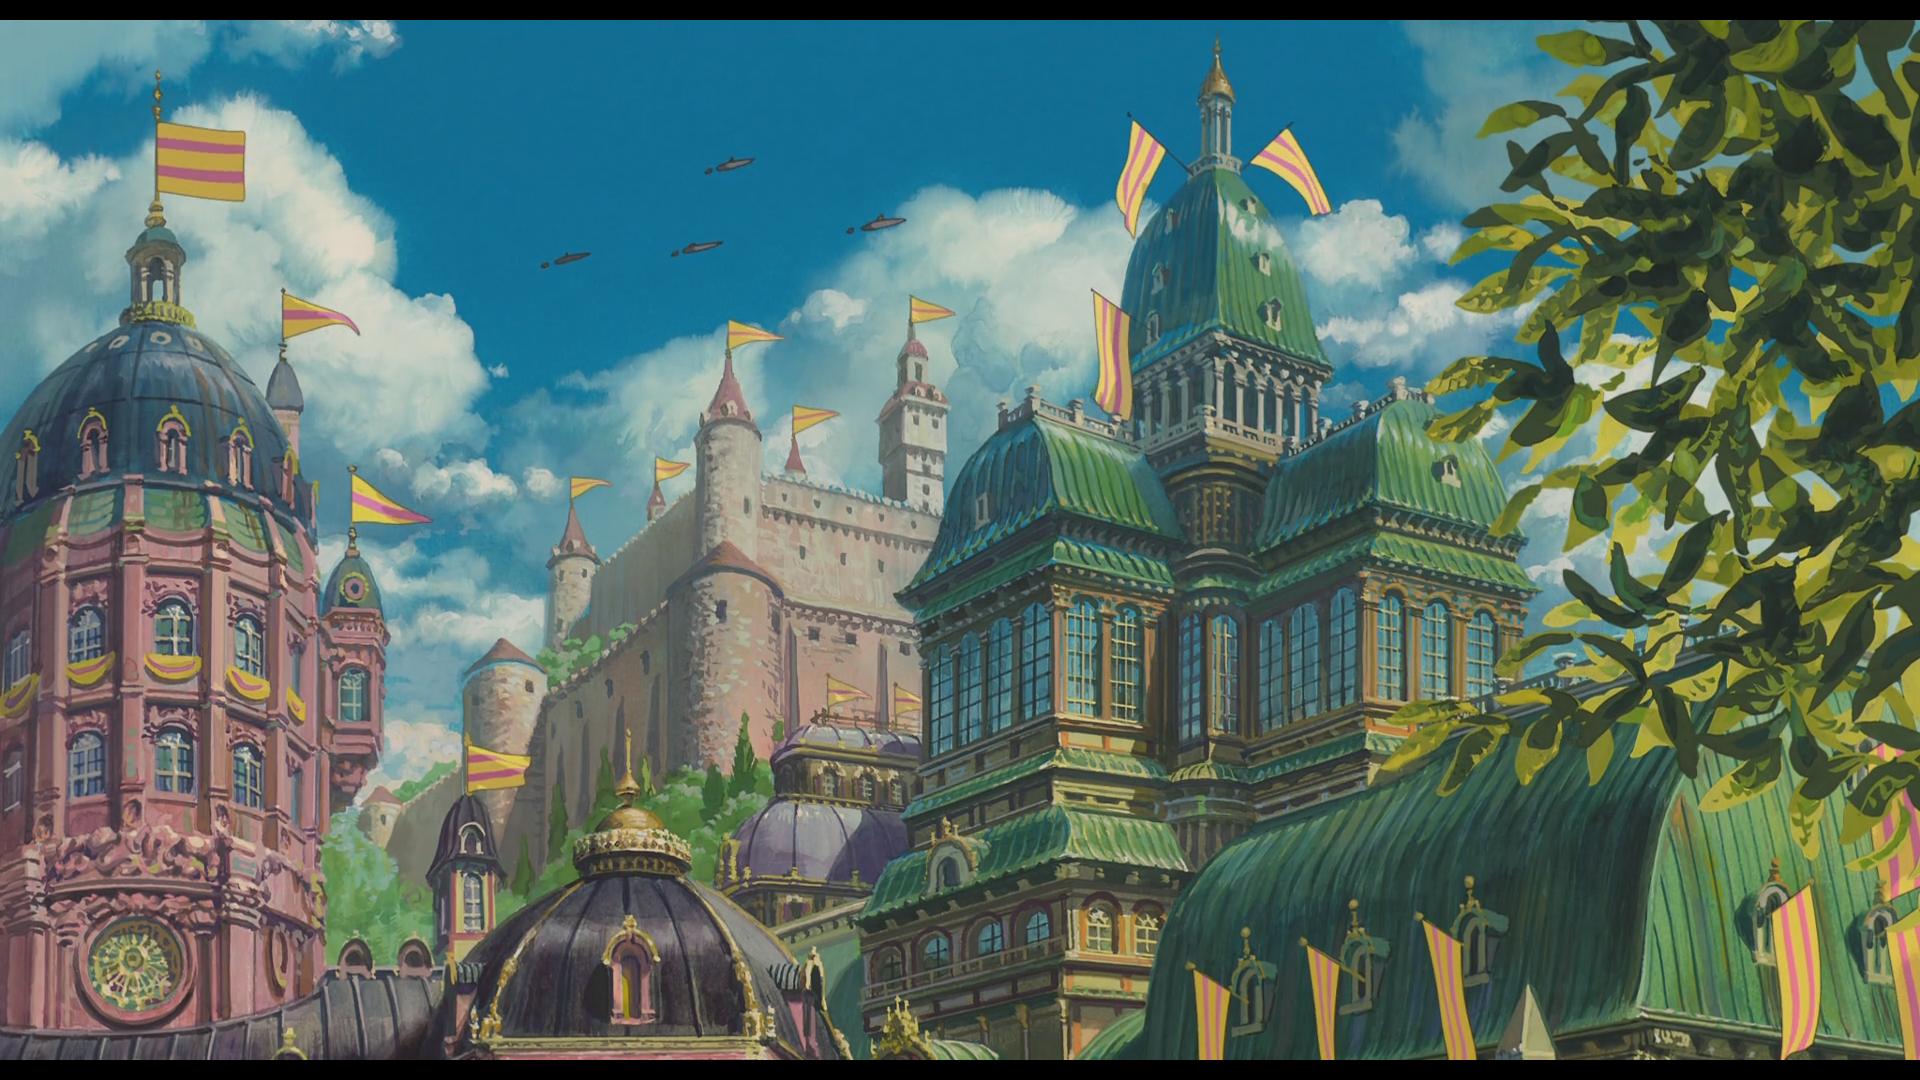 The sky castle from Howl's Moving Castle - Castle